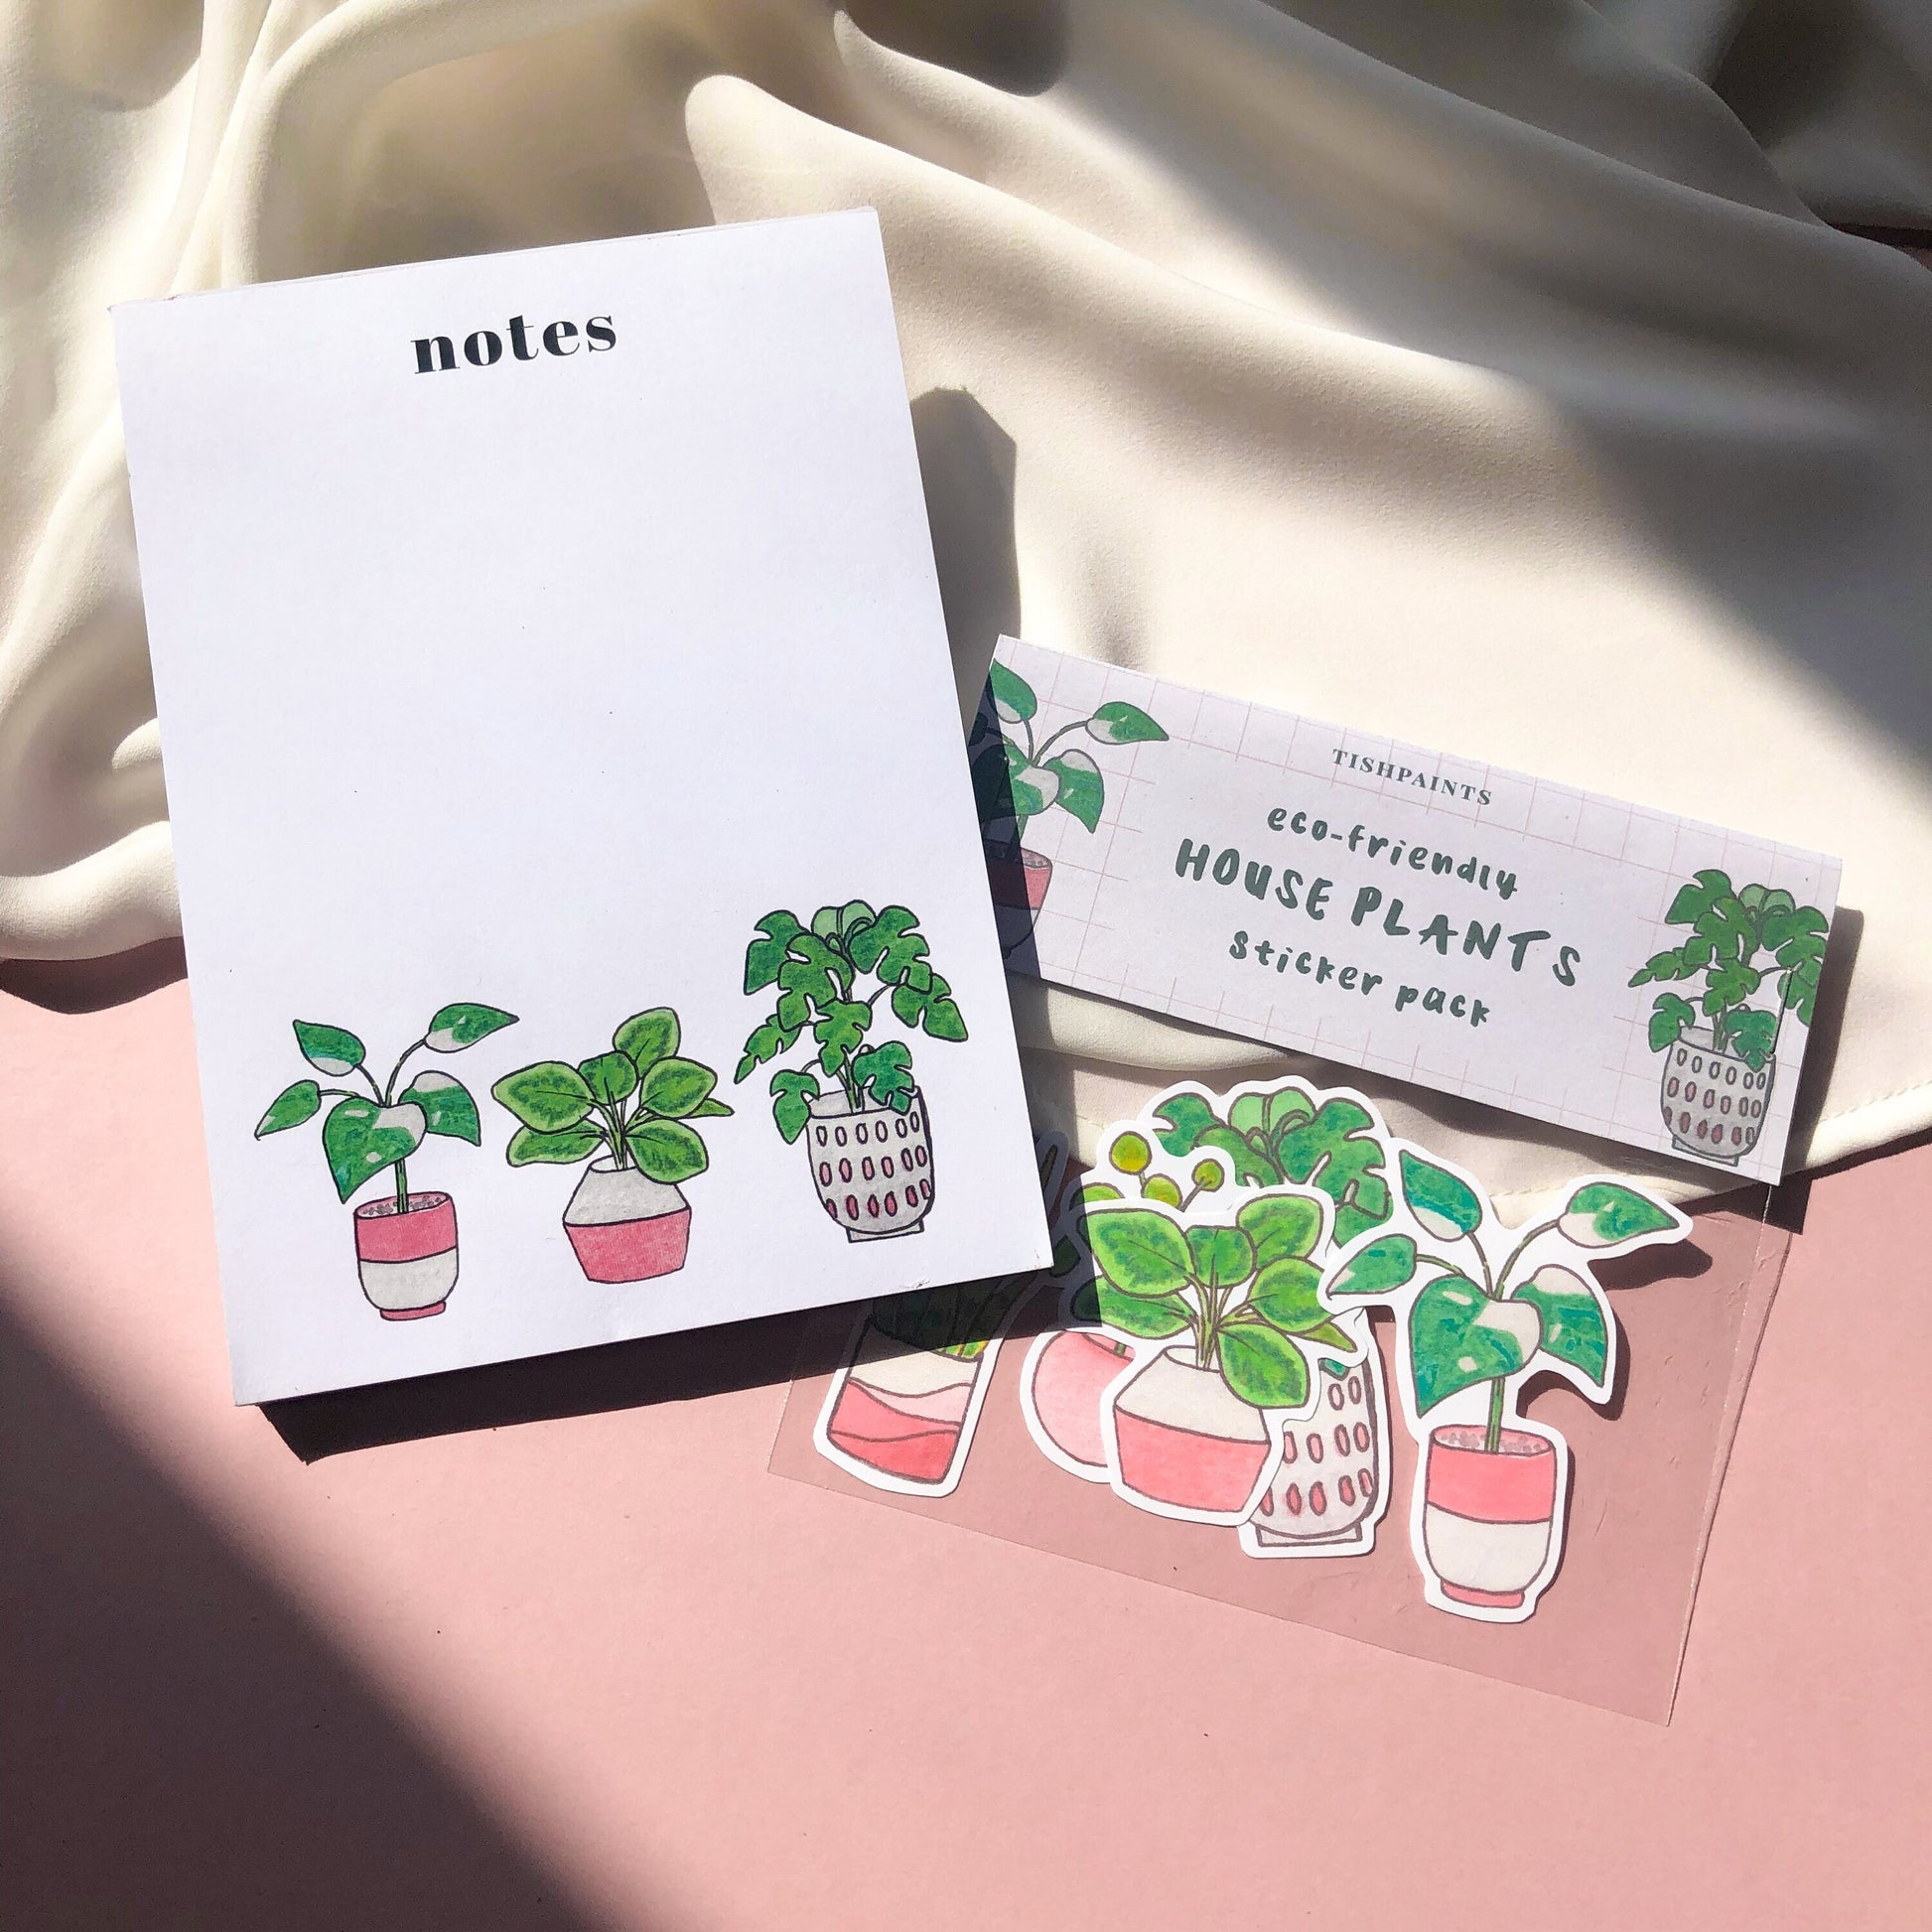 AHouse Plant A6 Notepad, Plant Illustration To Do List Memo Pad, 50 Pages Minimal Planner - Monstera, Calathea, Plant Lover Stationery Gift